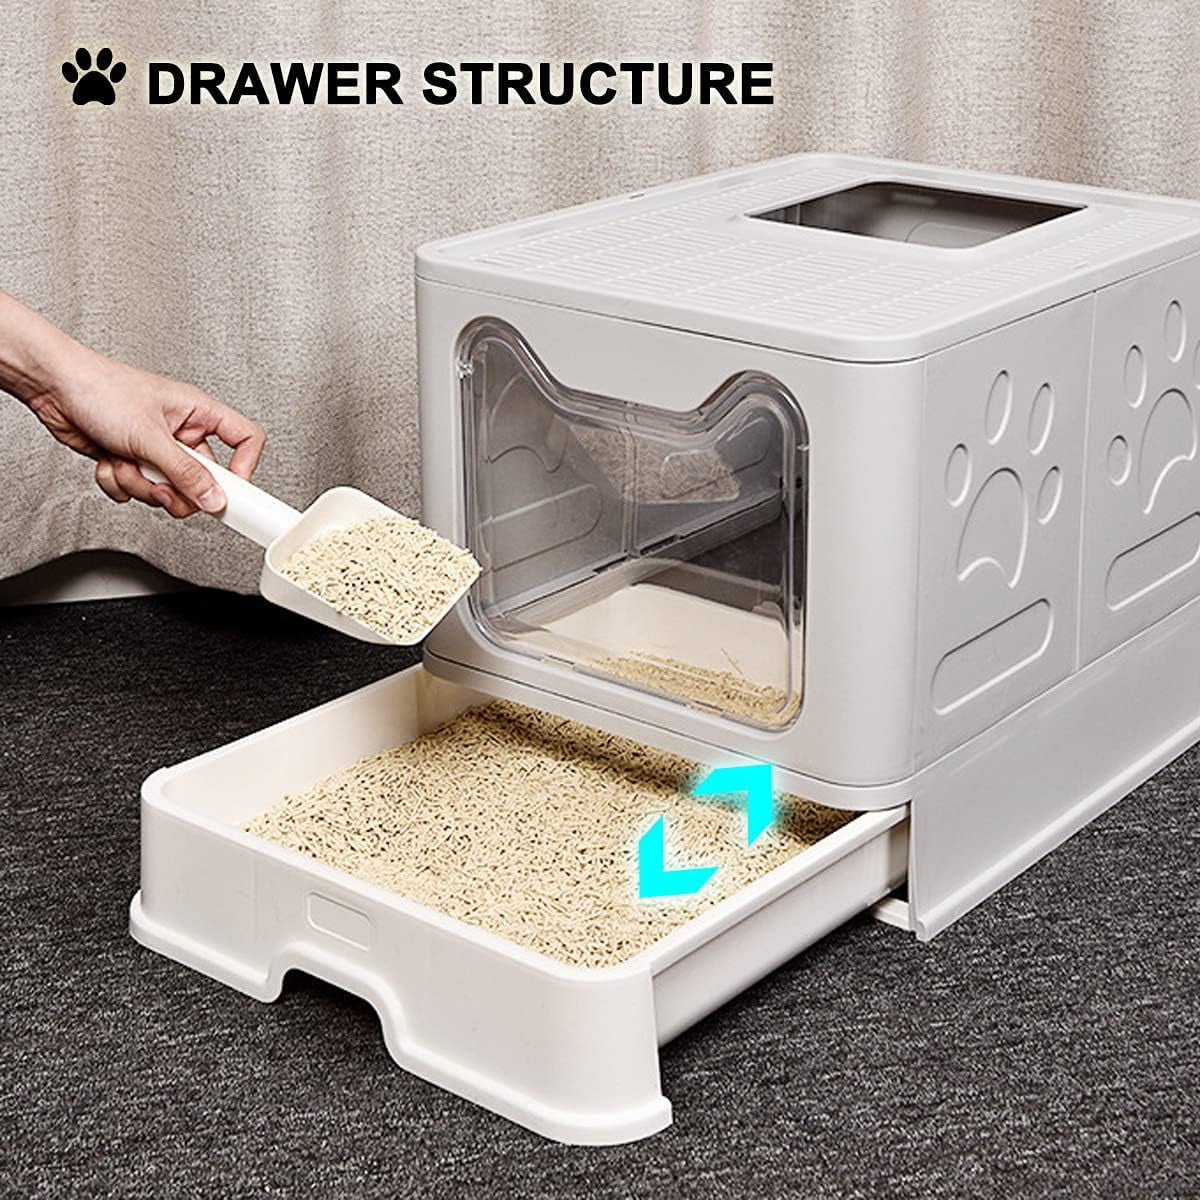 Large Foldable Cat Litter Box with Lid - Top Entry Design for Anti-Splashing, Includes Pet Plastic Scoop